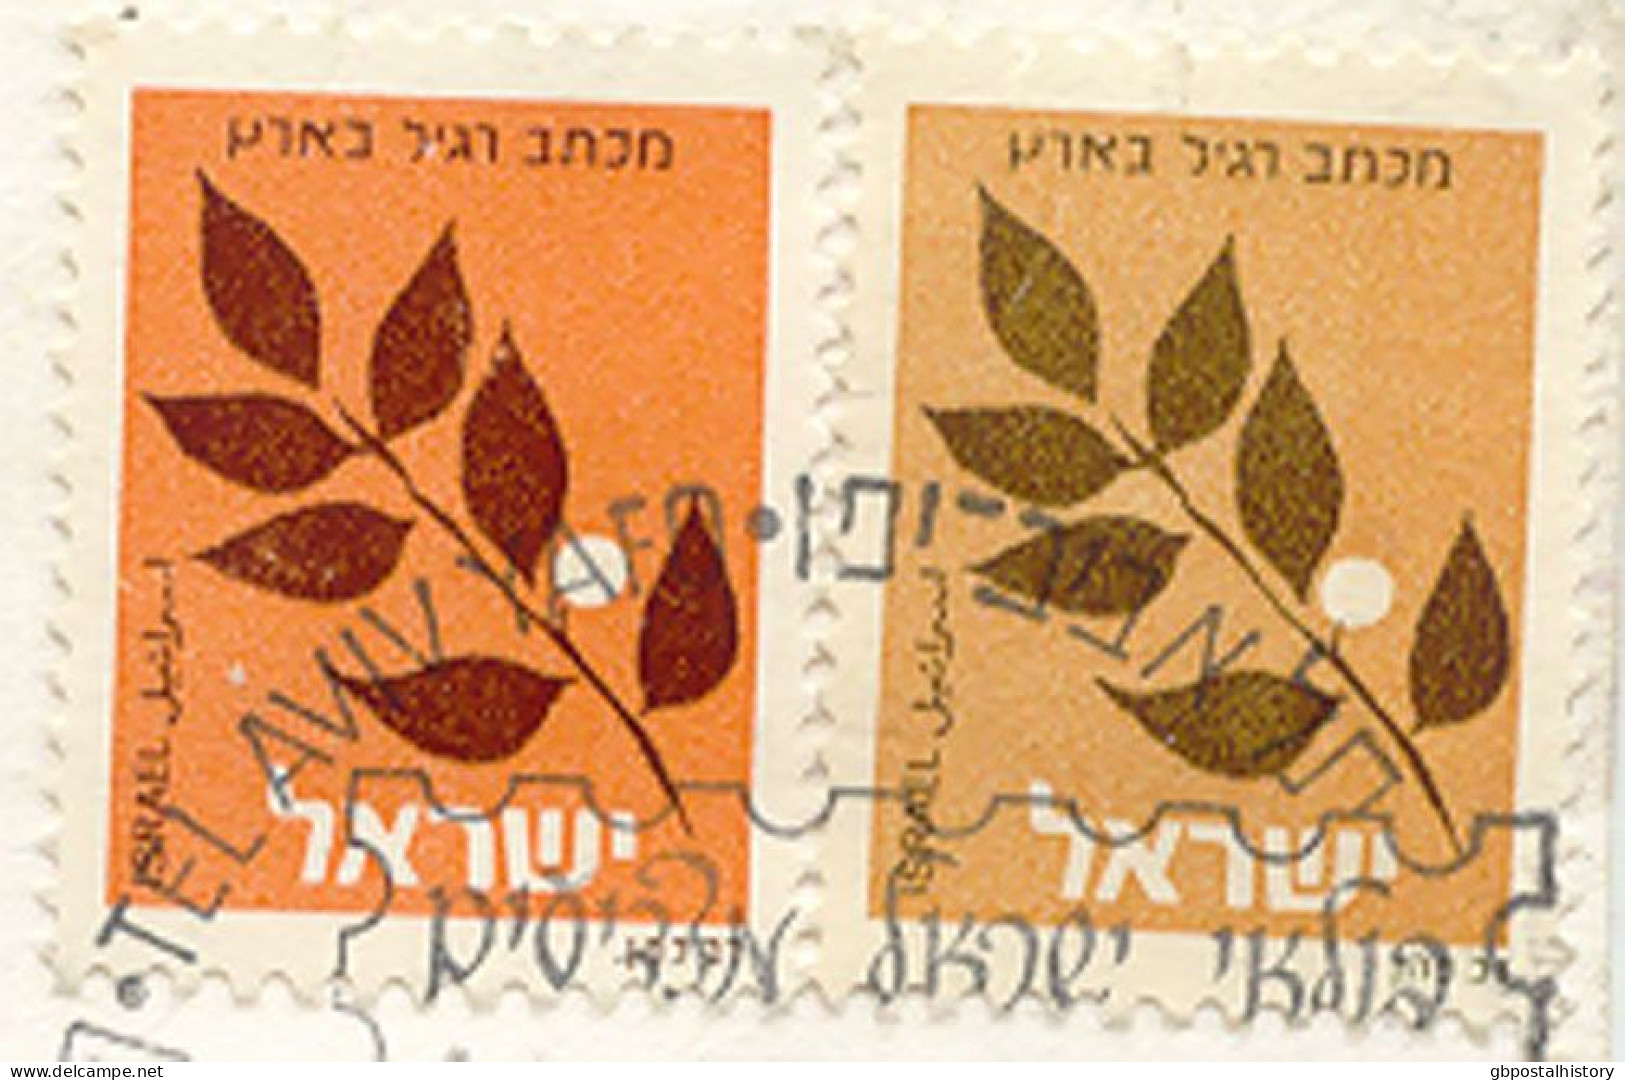 ISRAEL 1986 Branch Without Valuation 2 Times On Very Fine Cover With SST "AMERIPEX '86 22.5.1986", MAJOR ERROR & VARIETY - Lettres & Documents